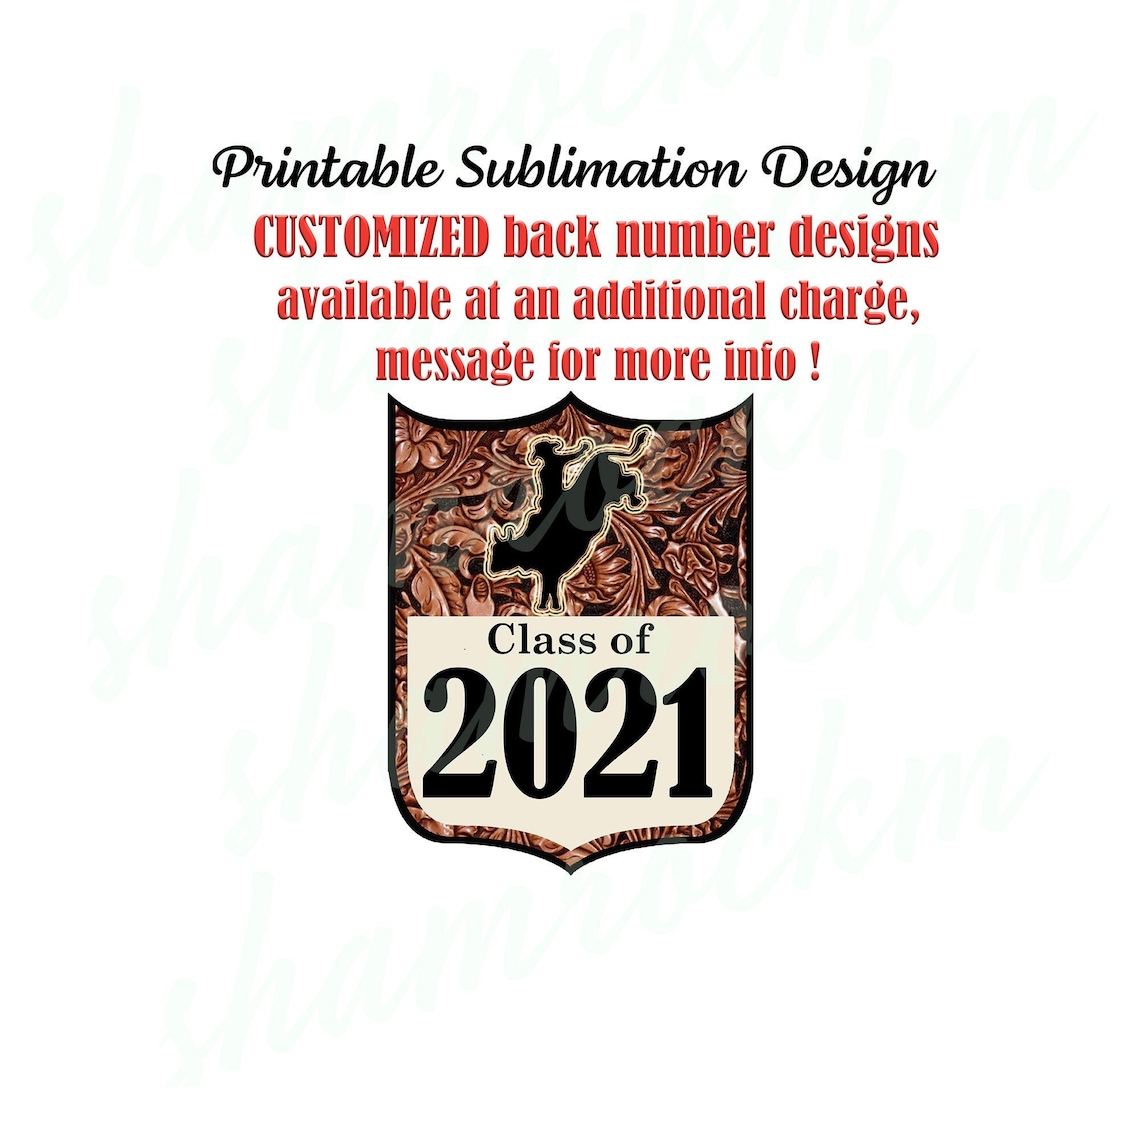 printable-sublimation-design-rodeo-back-number-bull-rider-etsy